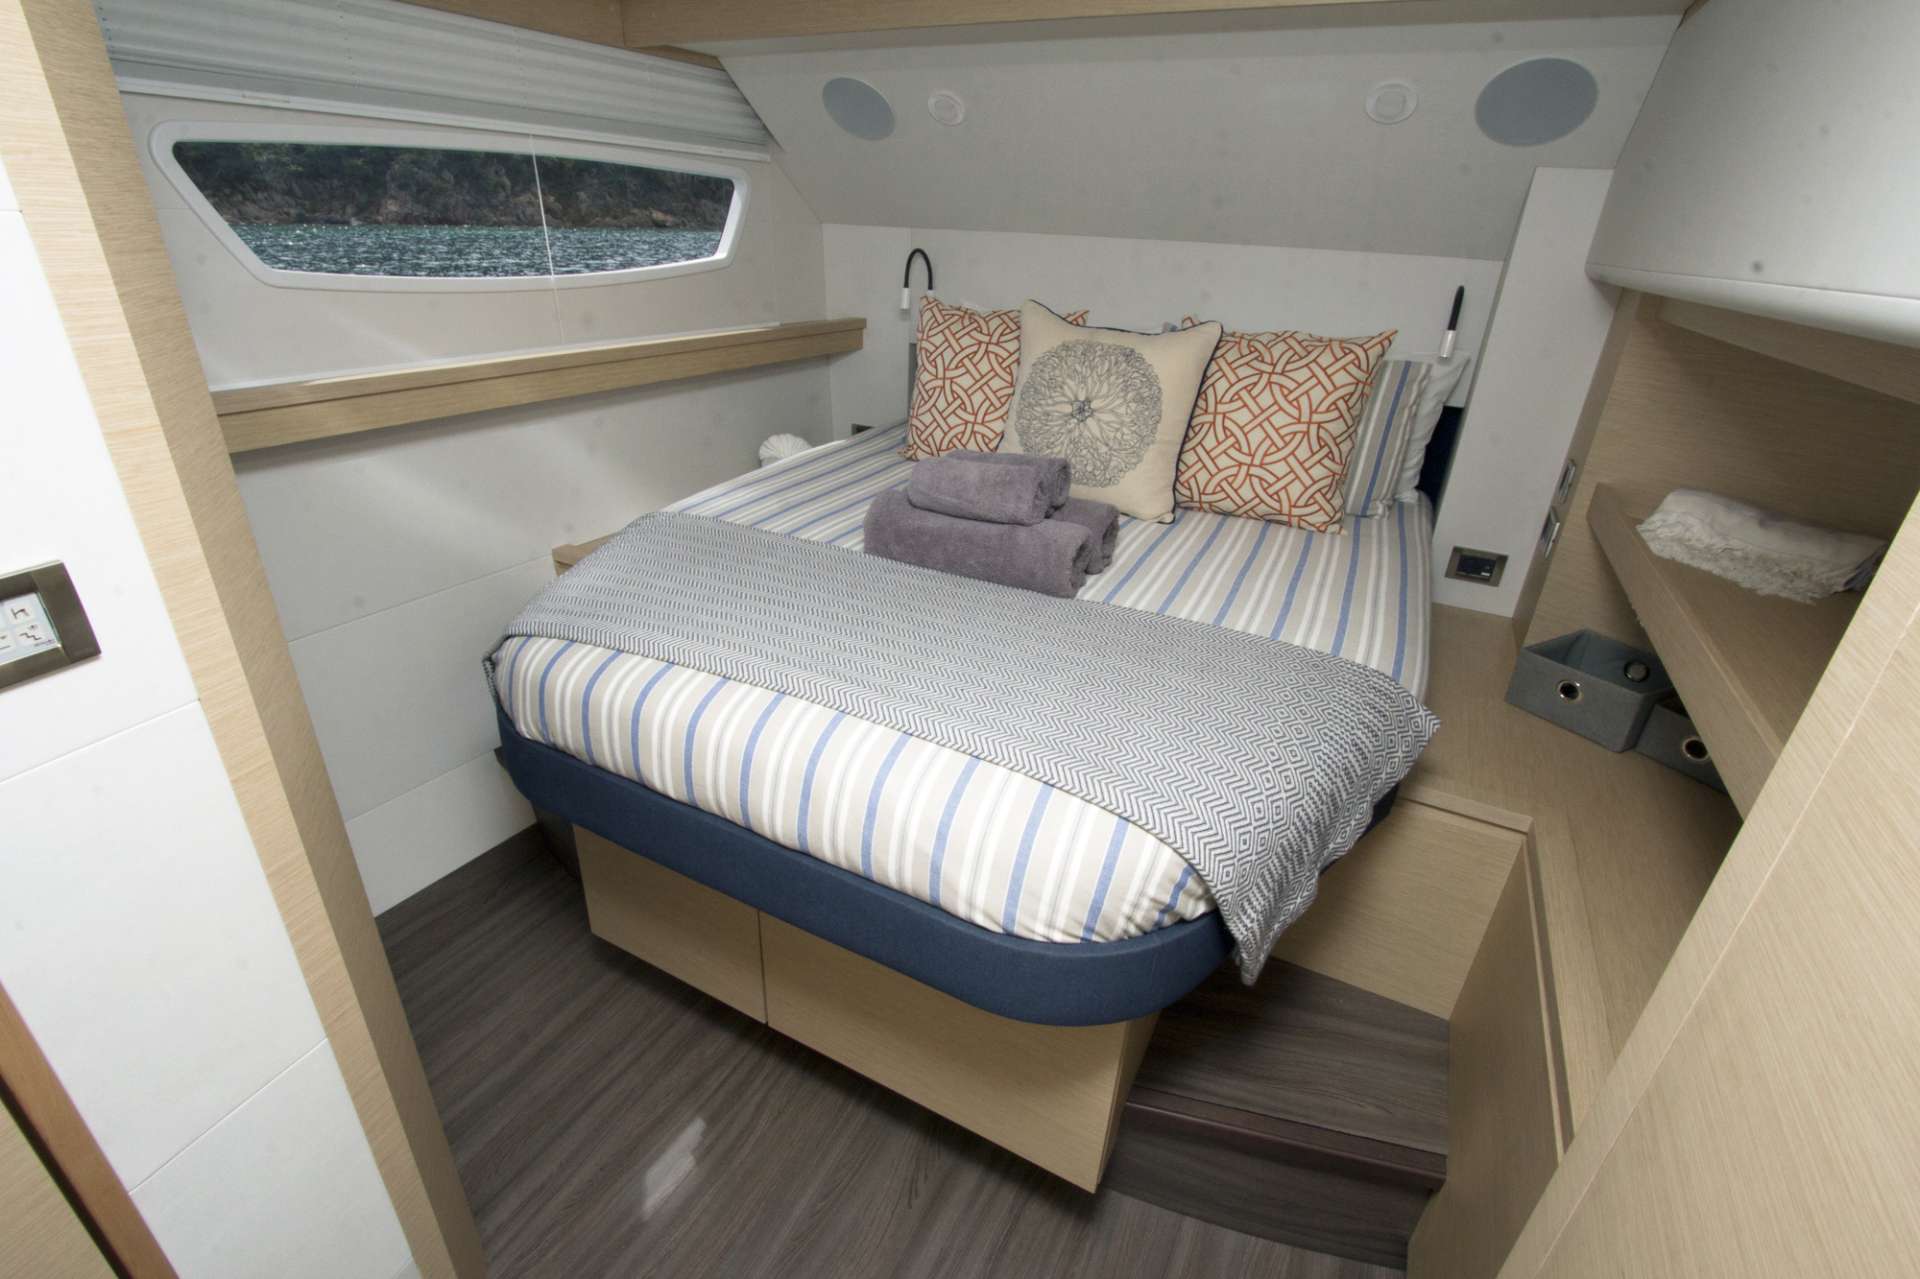 Catamaran Yacht 'NENNE' Guest Cabin, 10 PAX, 3 Crew, 67.00 Ft, 20.00 Meters, Built 2017, Fountaine-Pajot, Refit Year The latest, 2020 electronics and equipment onboard. New larger tender June 2019